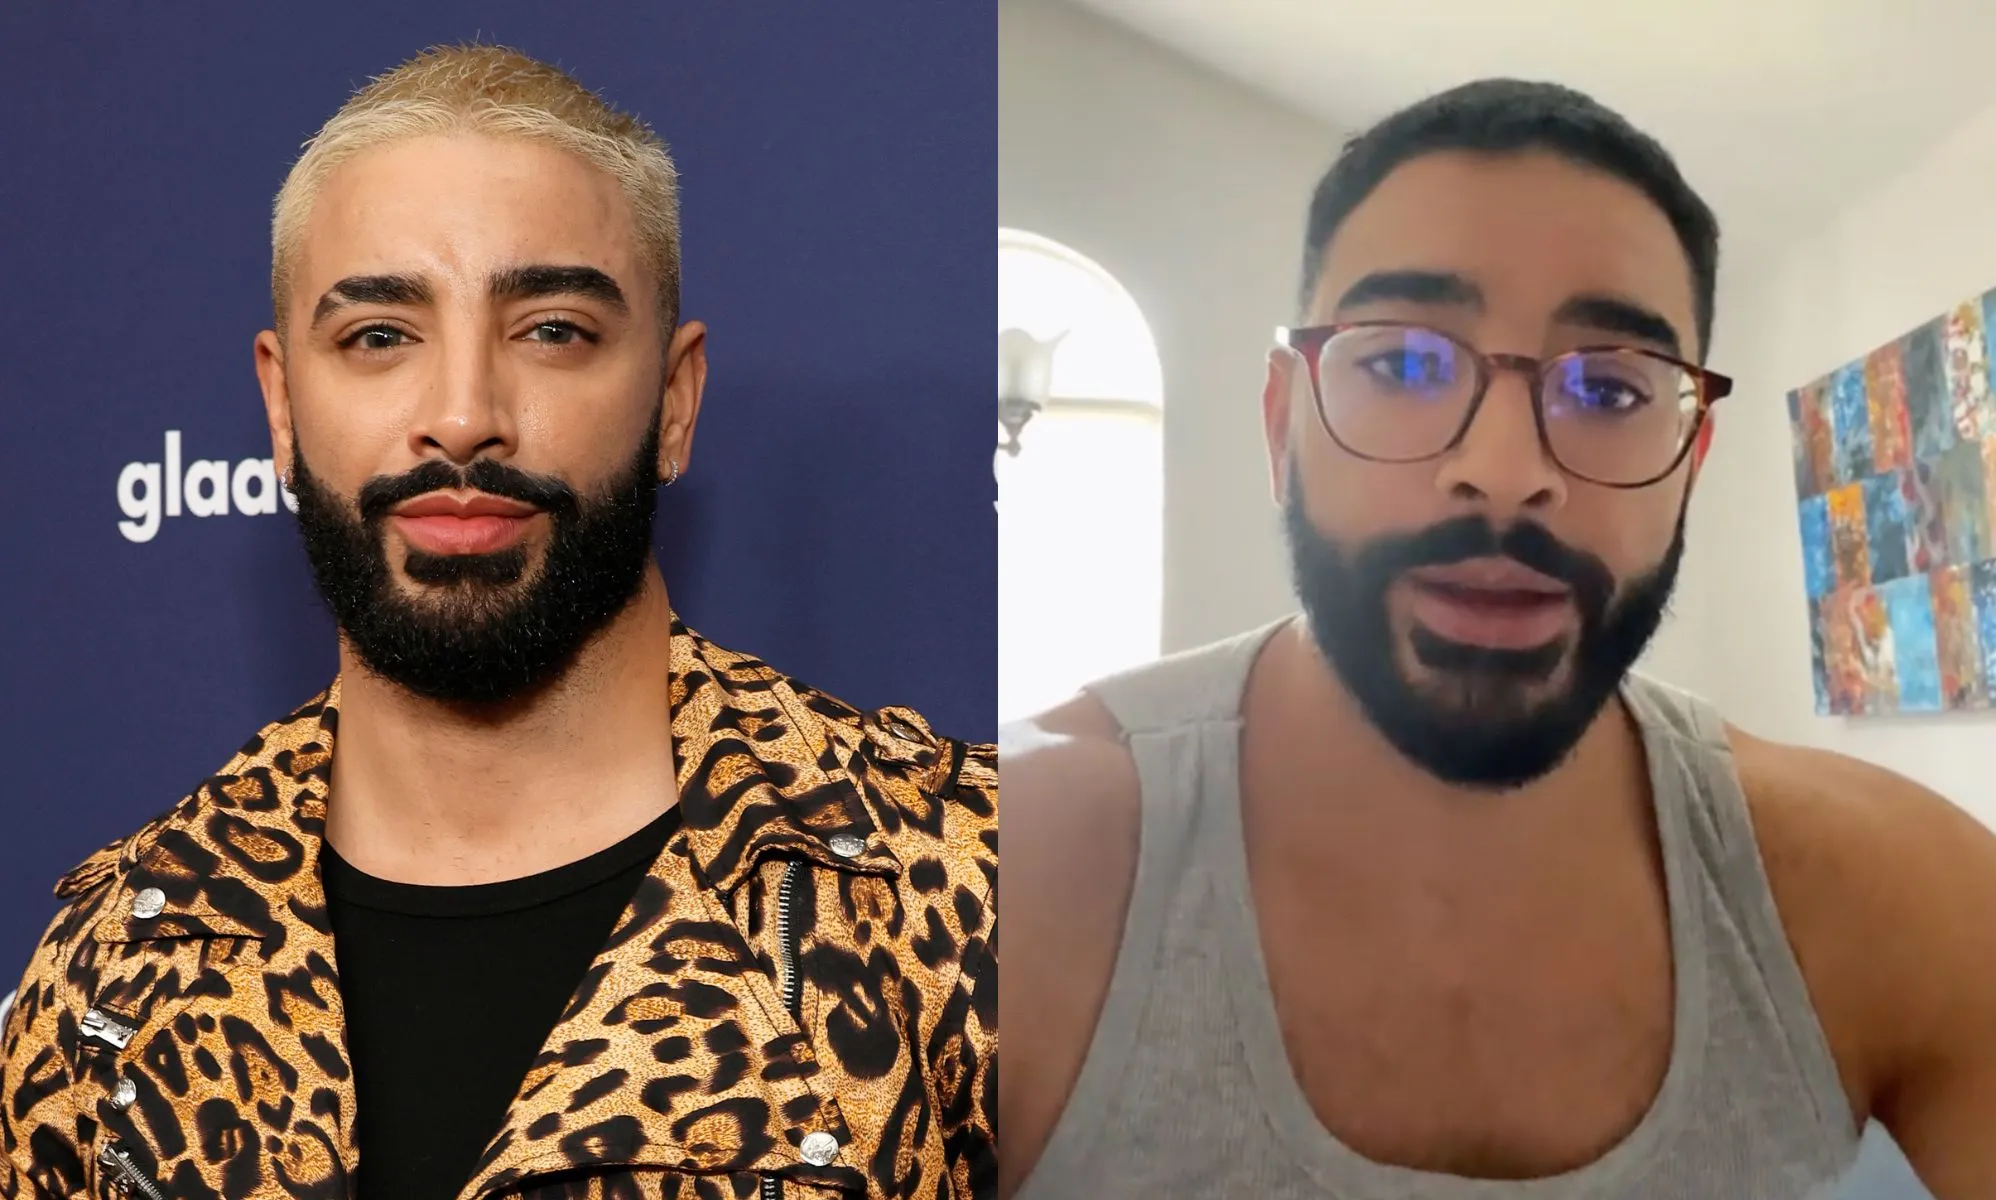 Trans model Laith Ashley ‘banned from TikTok Live’ over supposed ‘sexual activity’